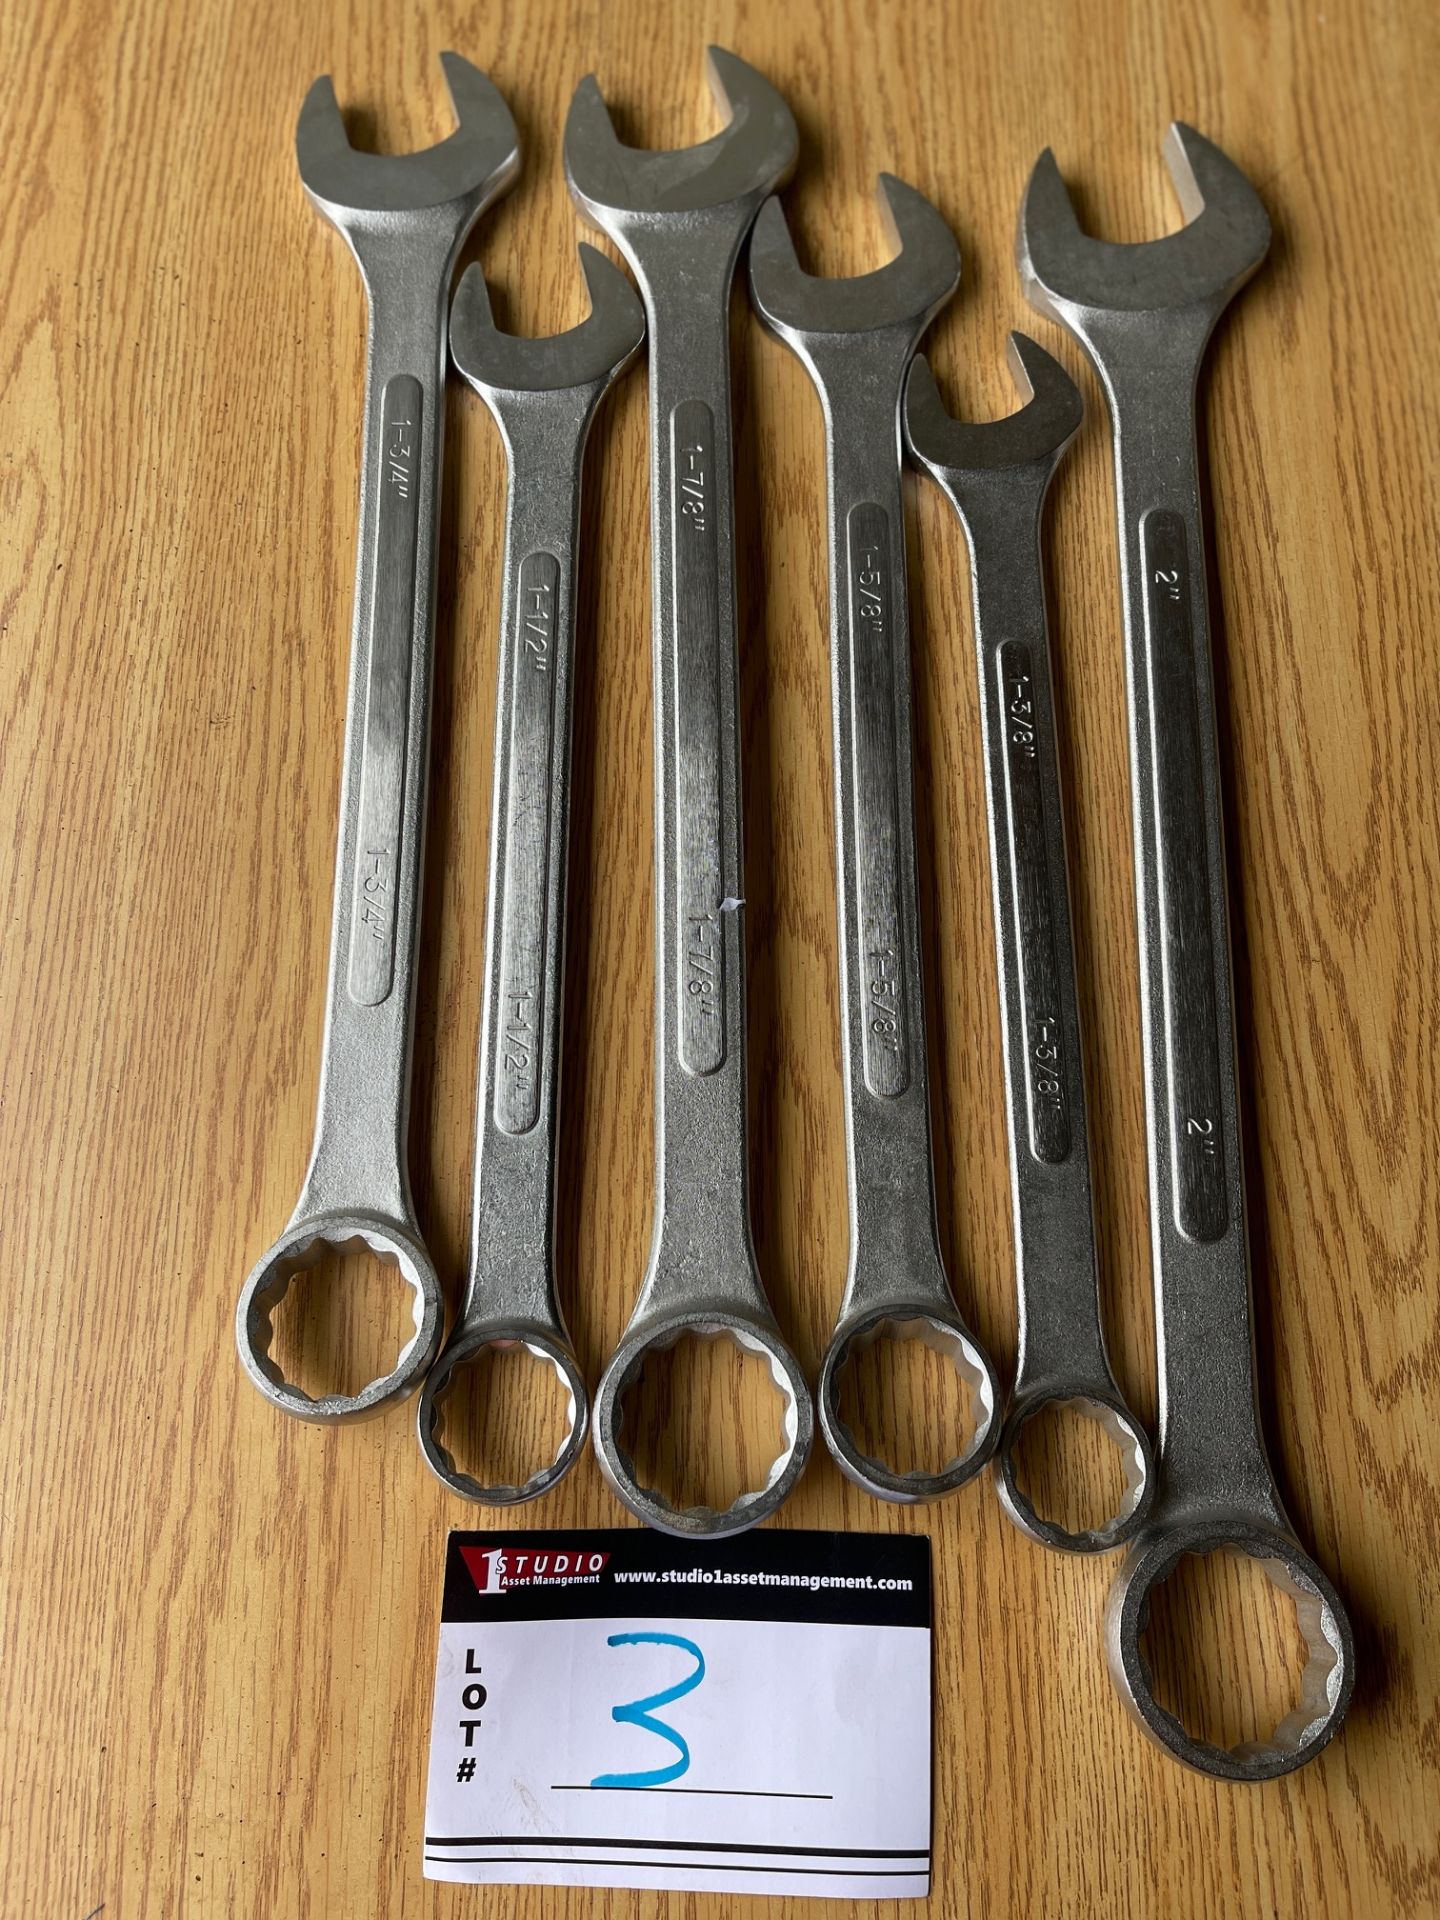 LOT/STANDARD SIZE WRENCHES - (SIZES INCLUDE - 1 3/4”, 1 1/2”, 1 7/8”, 1 5/8”, 1 3/8”, 2” - Image 2 of 2